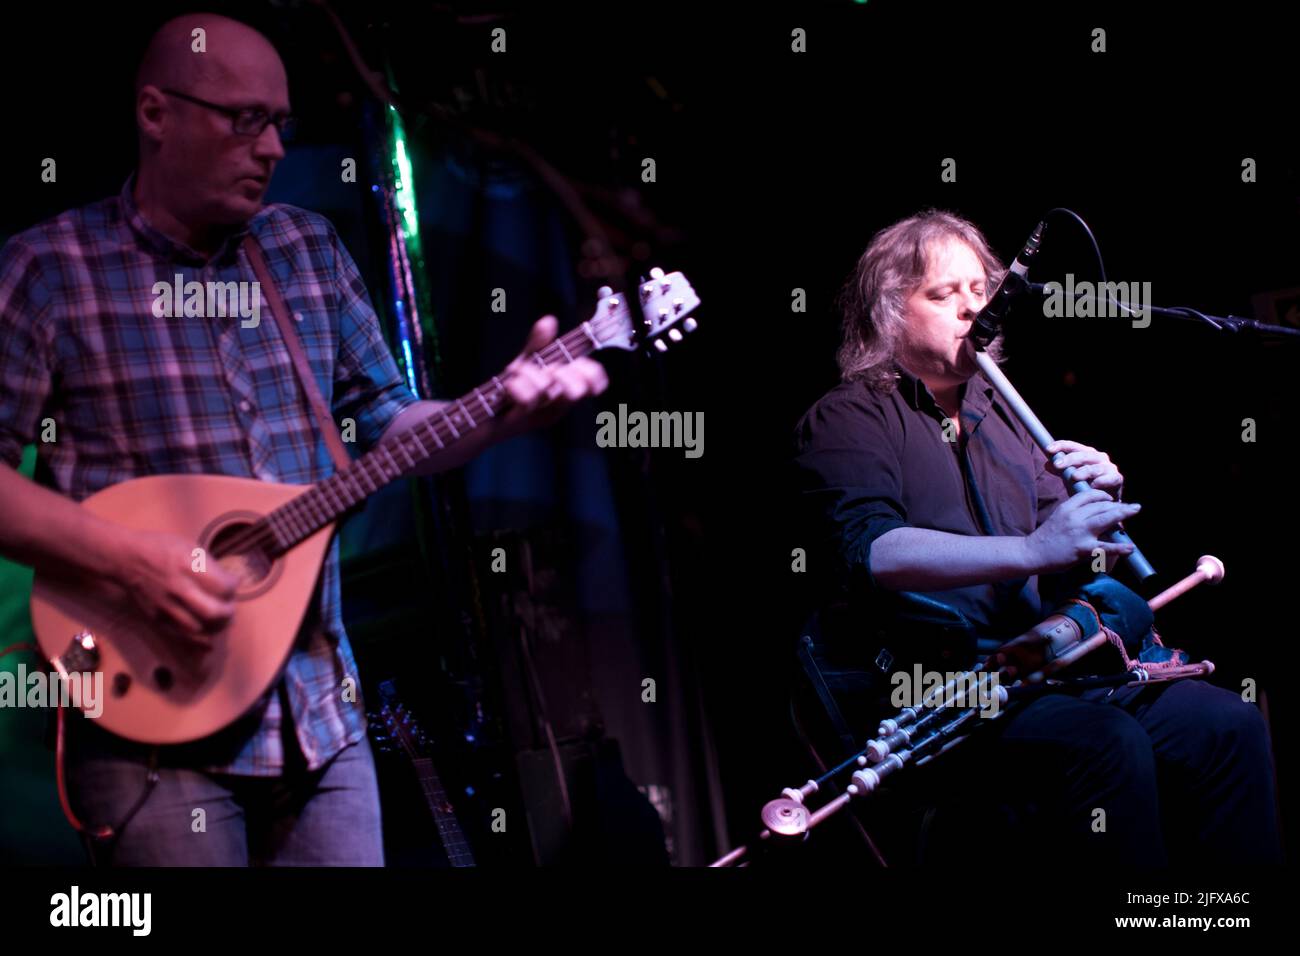 Fiddle player Andy Dinan, uillean pipes player Troy Donockley and Adrian Edmondson from The Bad Shepherds play the Fleece in Bristol as part of their First Farewell Tour. 28 October 2011. Stock Photo